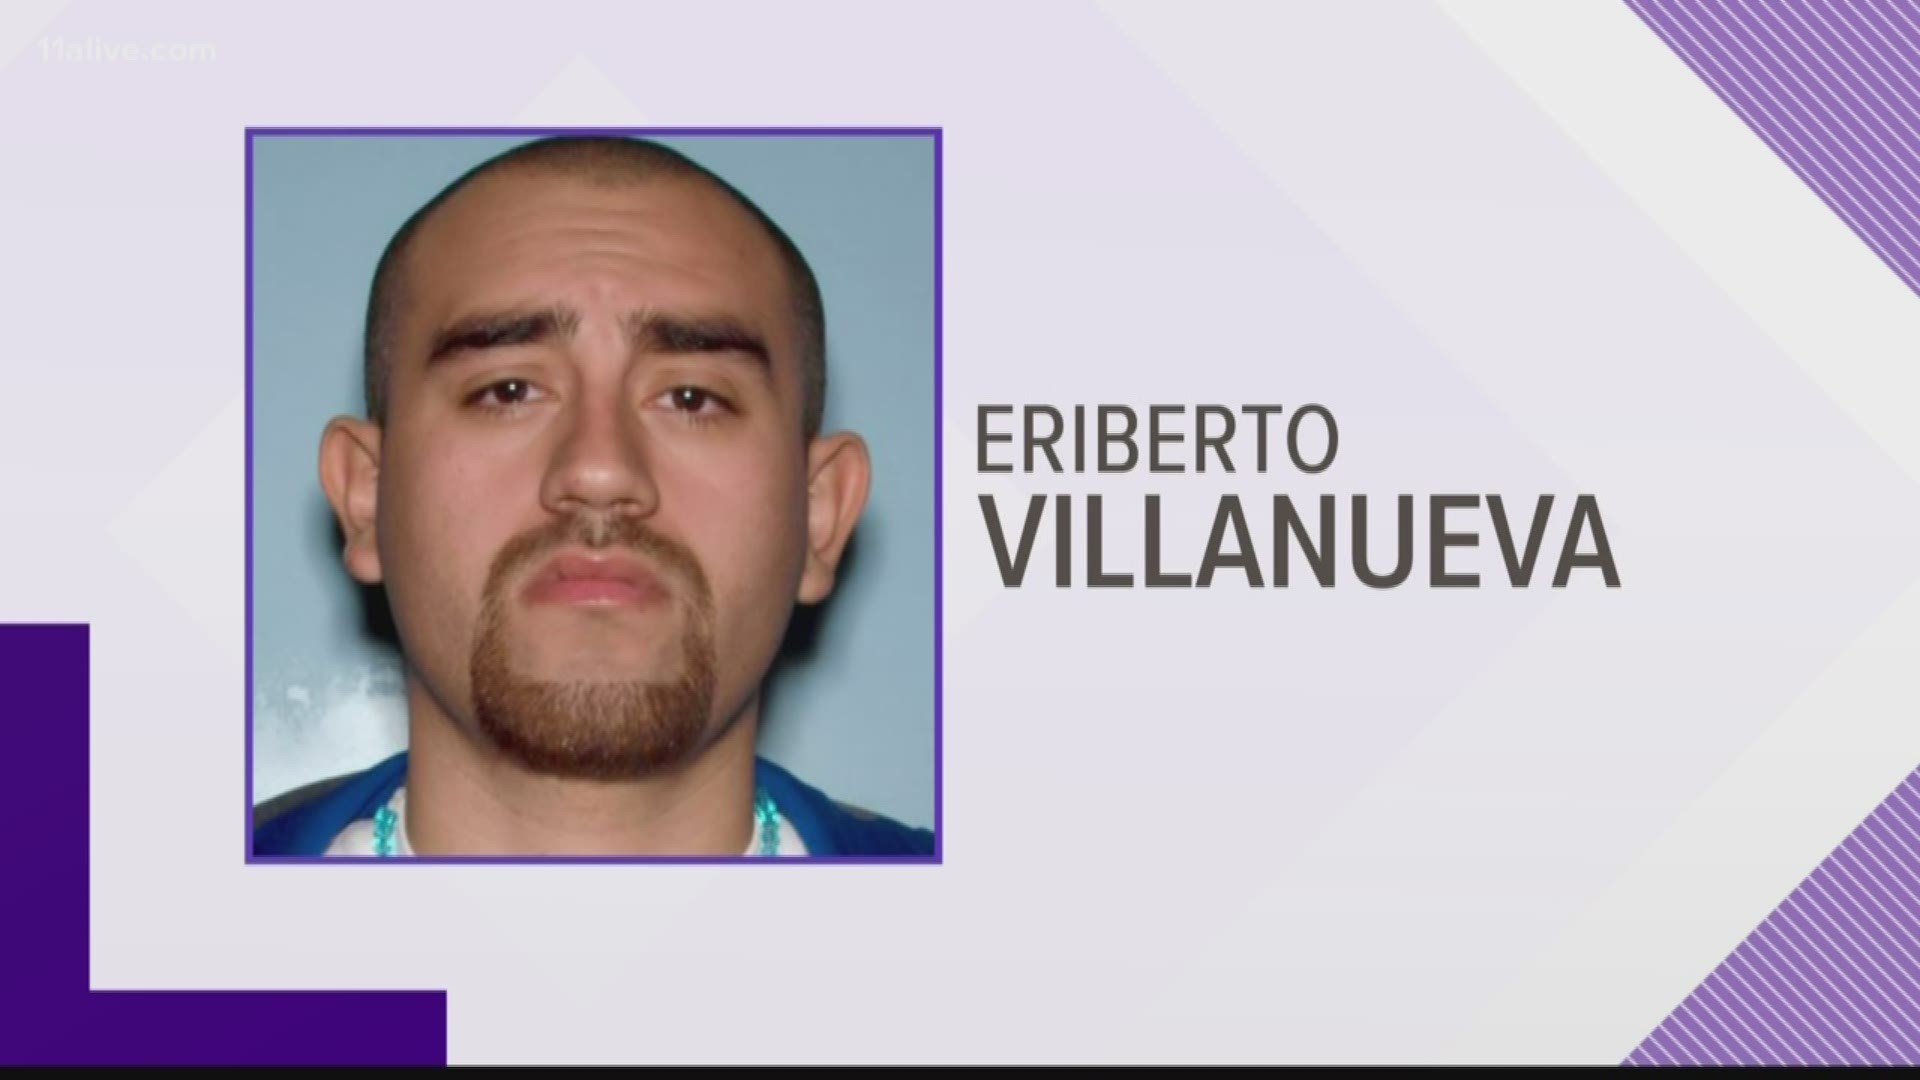 According to the Gwinnett County Police Department, Eriberto Villanueva, 28, has active warrants for his arrest in connection with the shooting death of Benedicto Gr